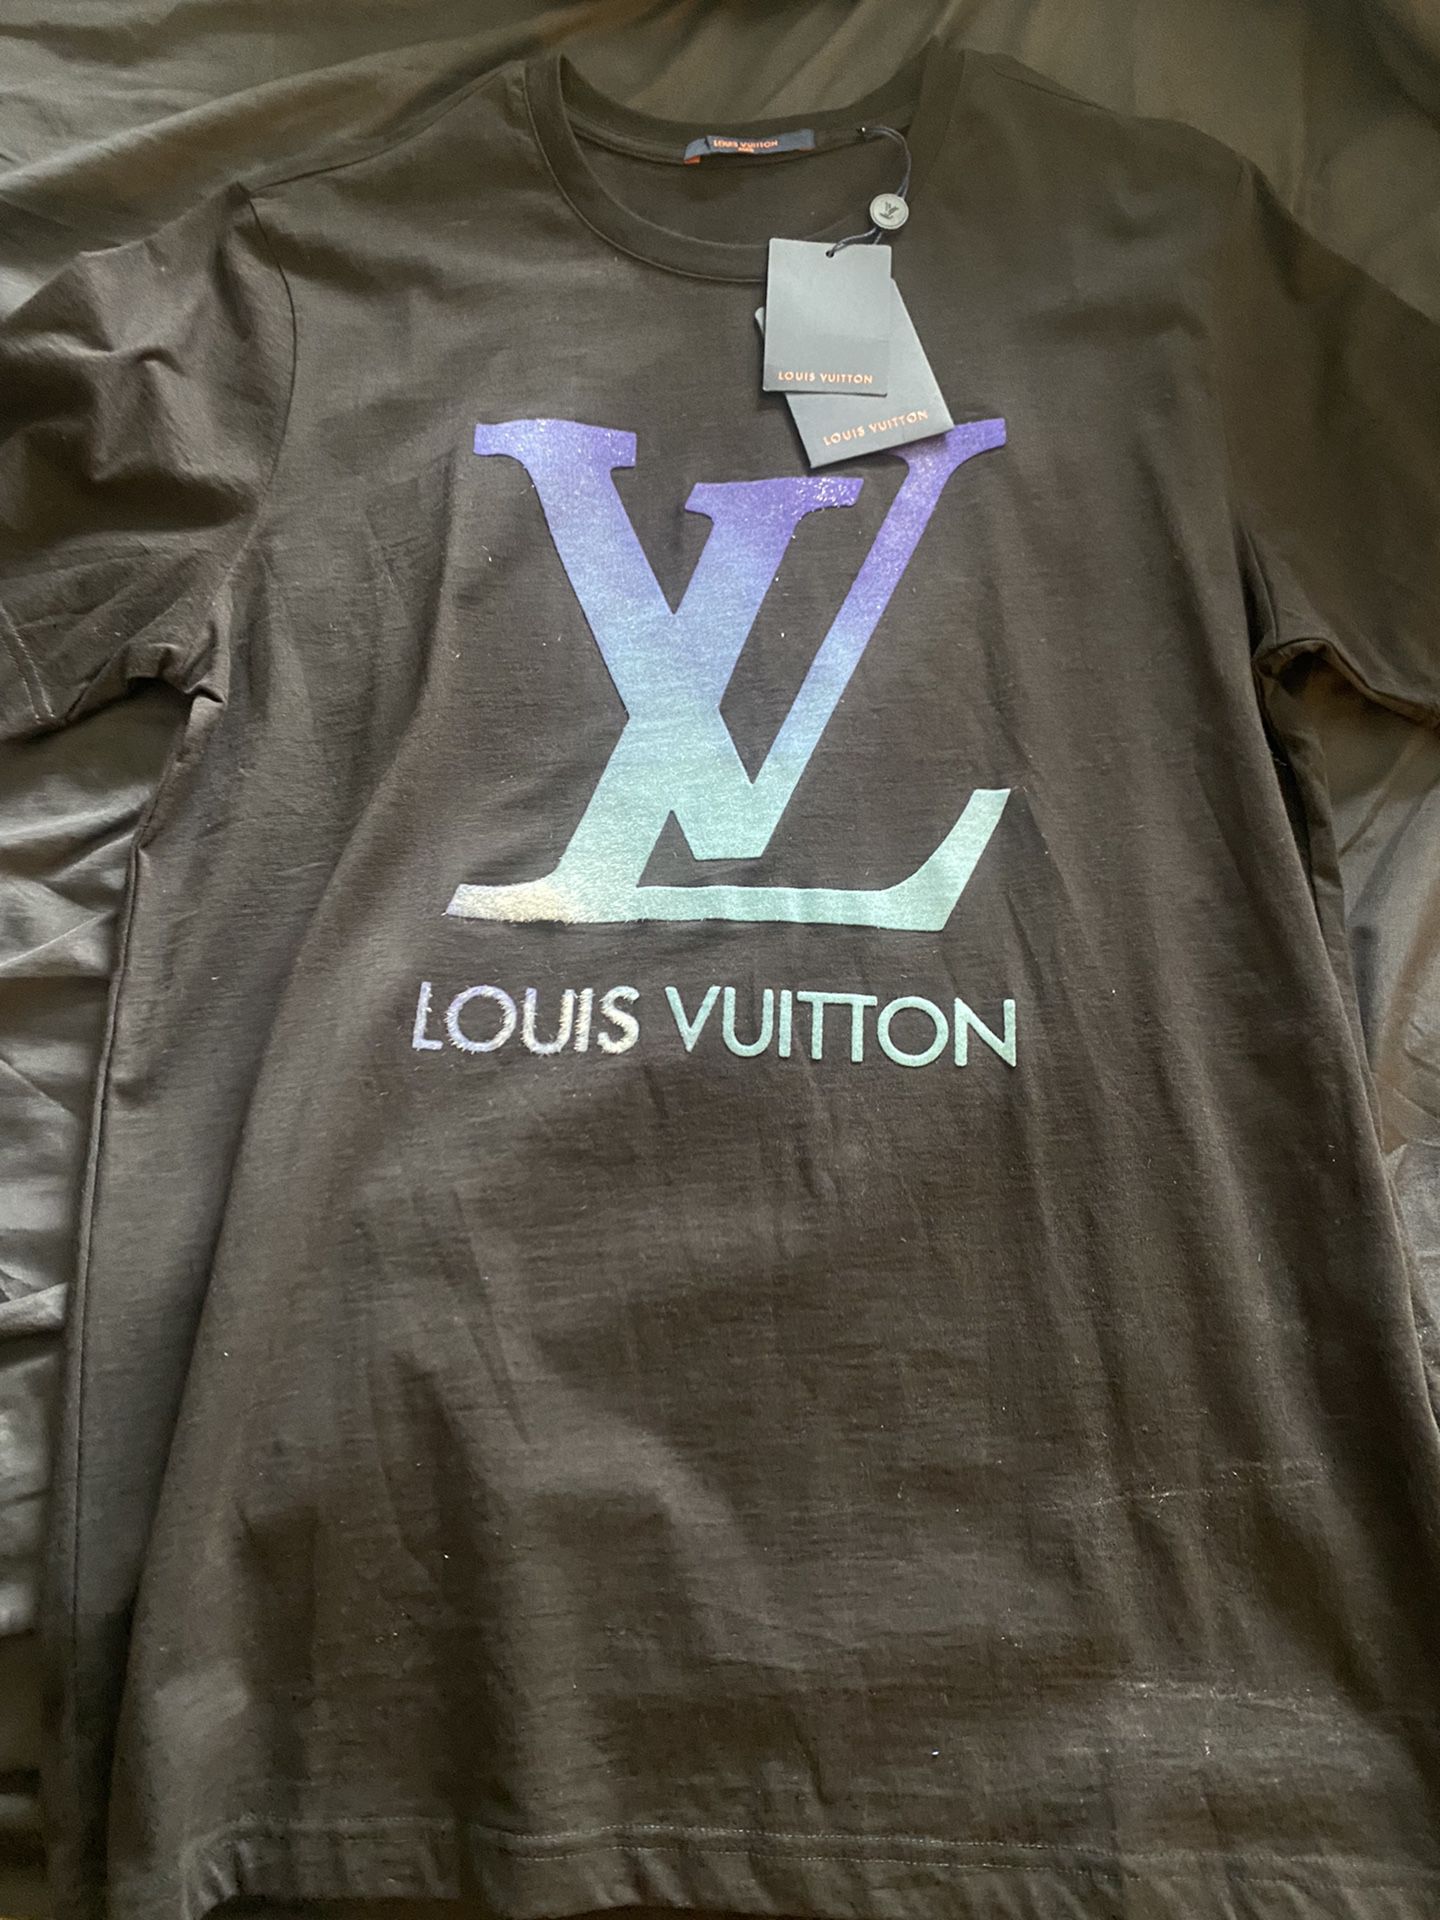 Authentic Louis Vuitton Tshirt New With Tags Size Large for Sale in